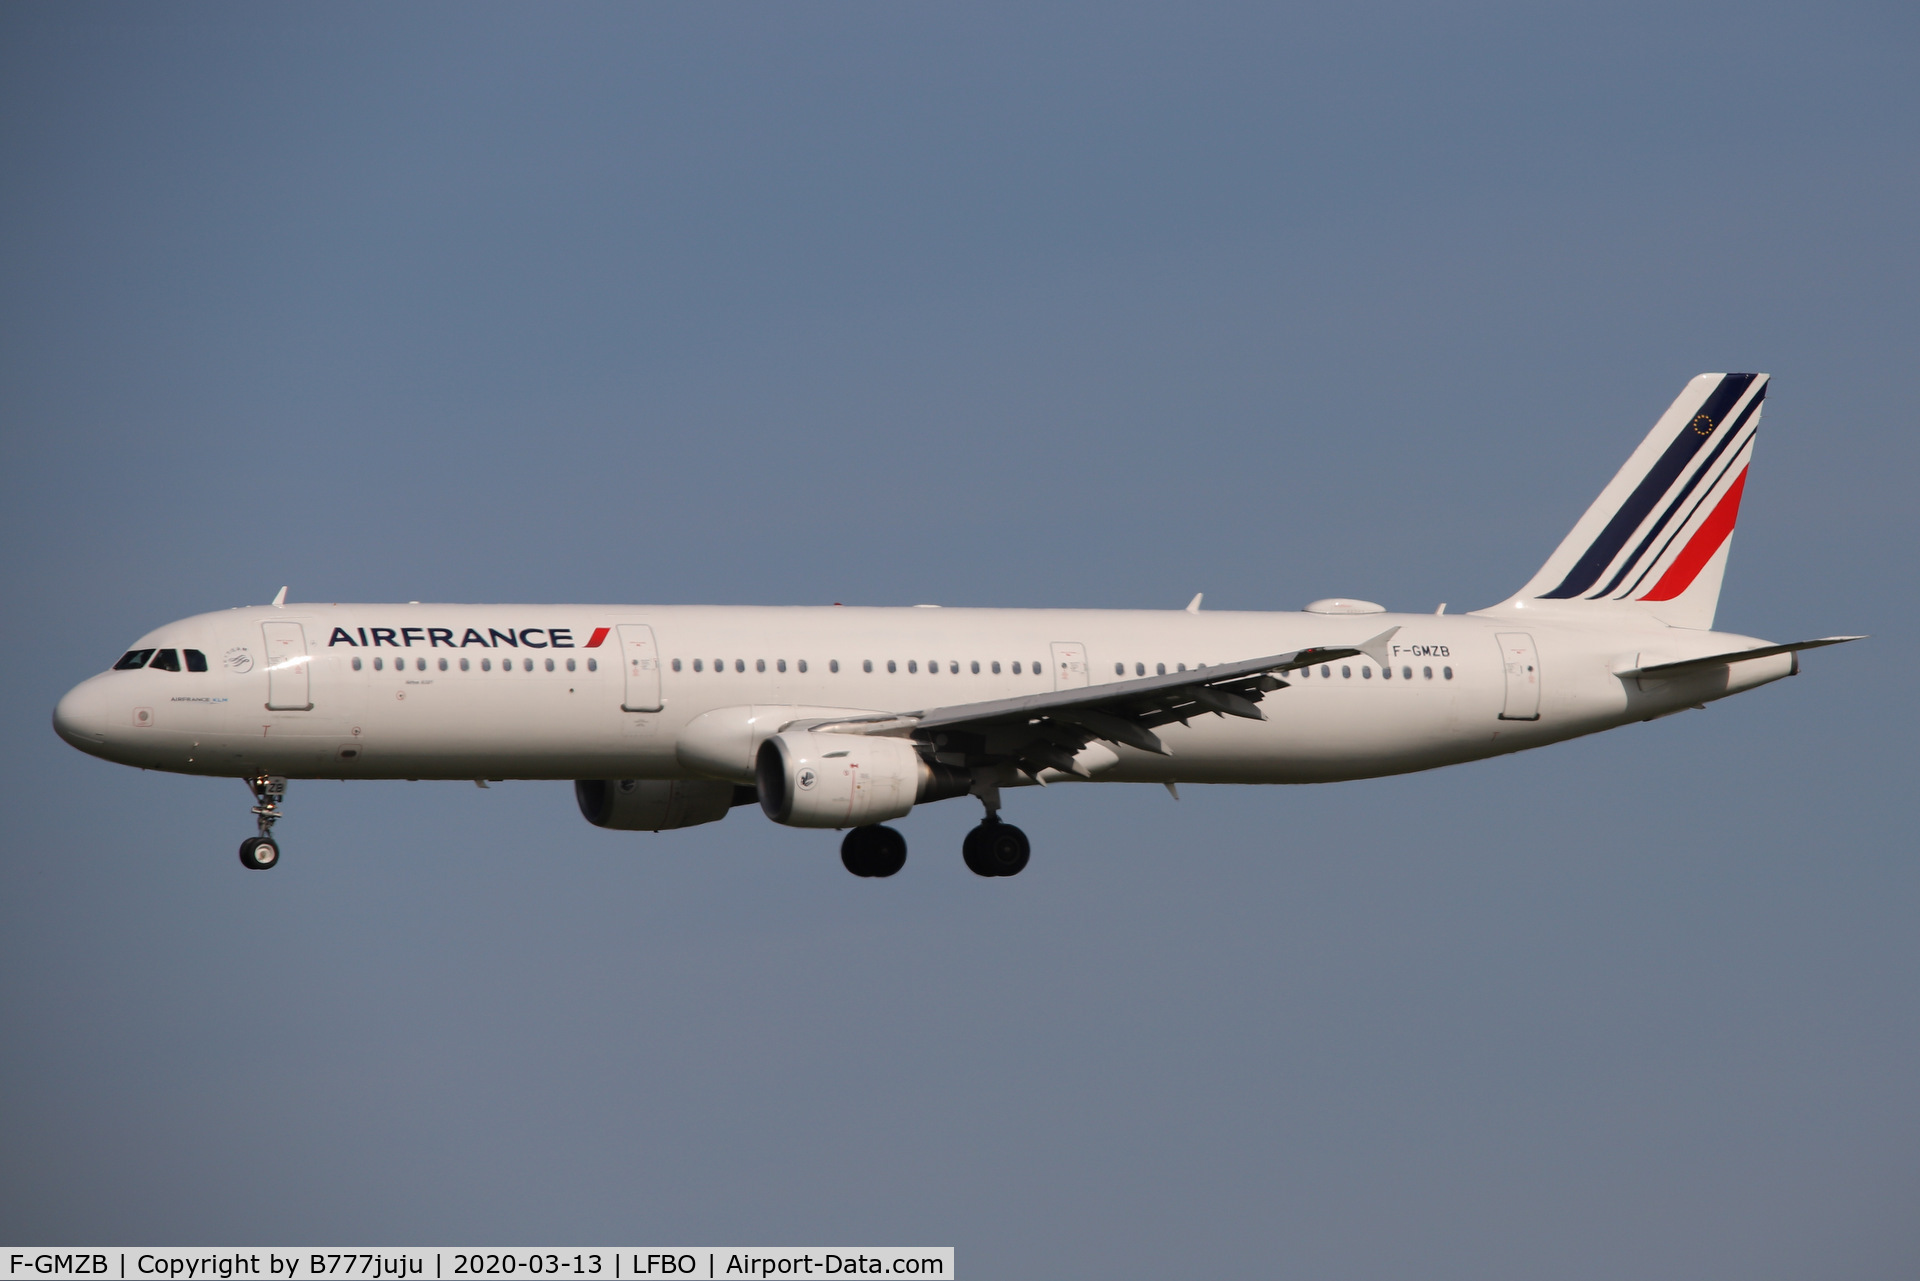 F-GMZB, 1994 Airbus A321-111 C/N 509, new WIFI antenna